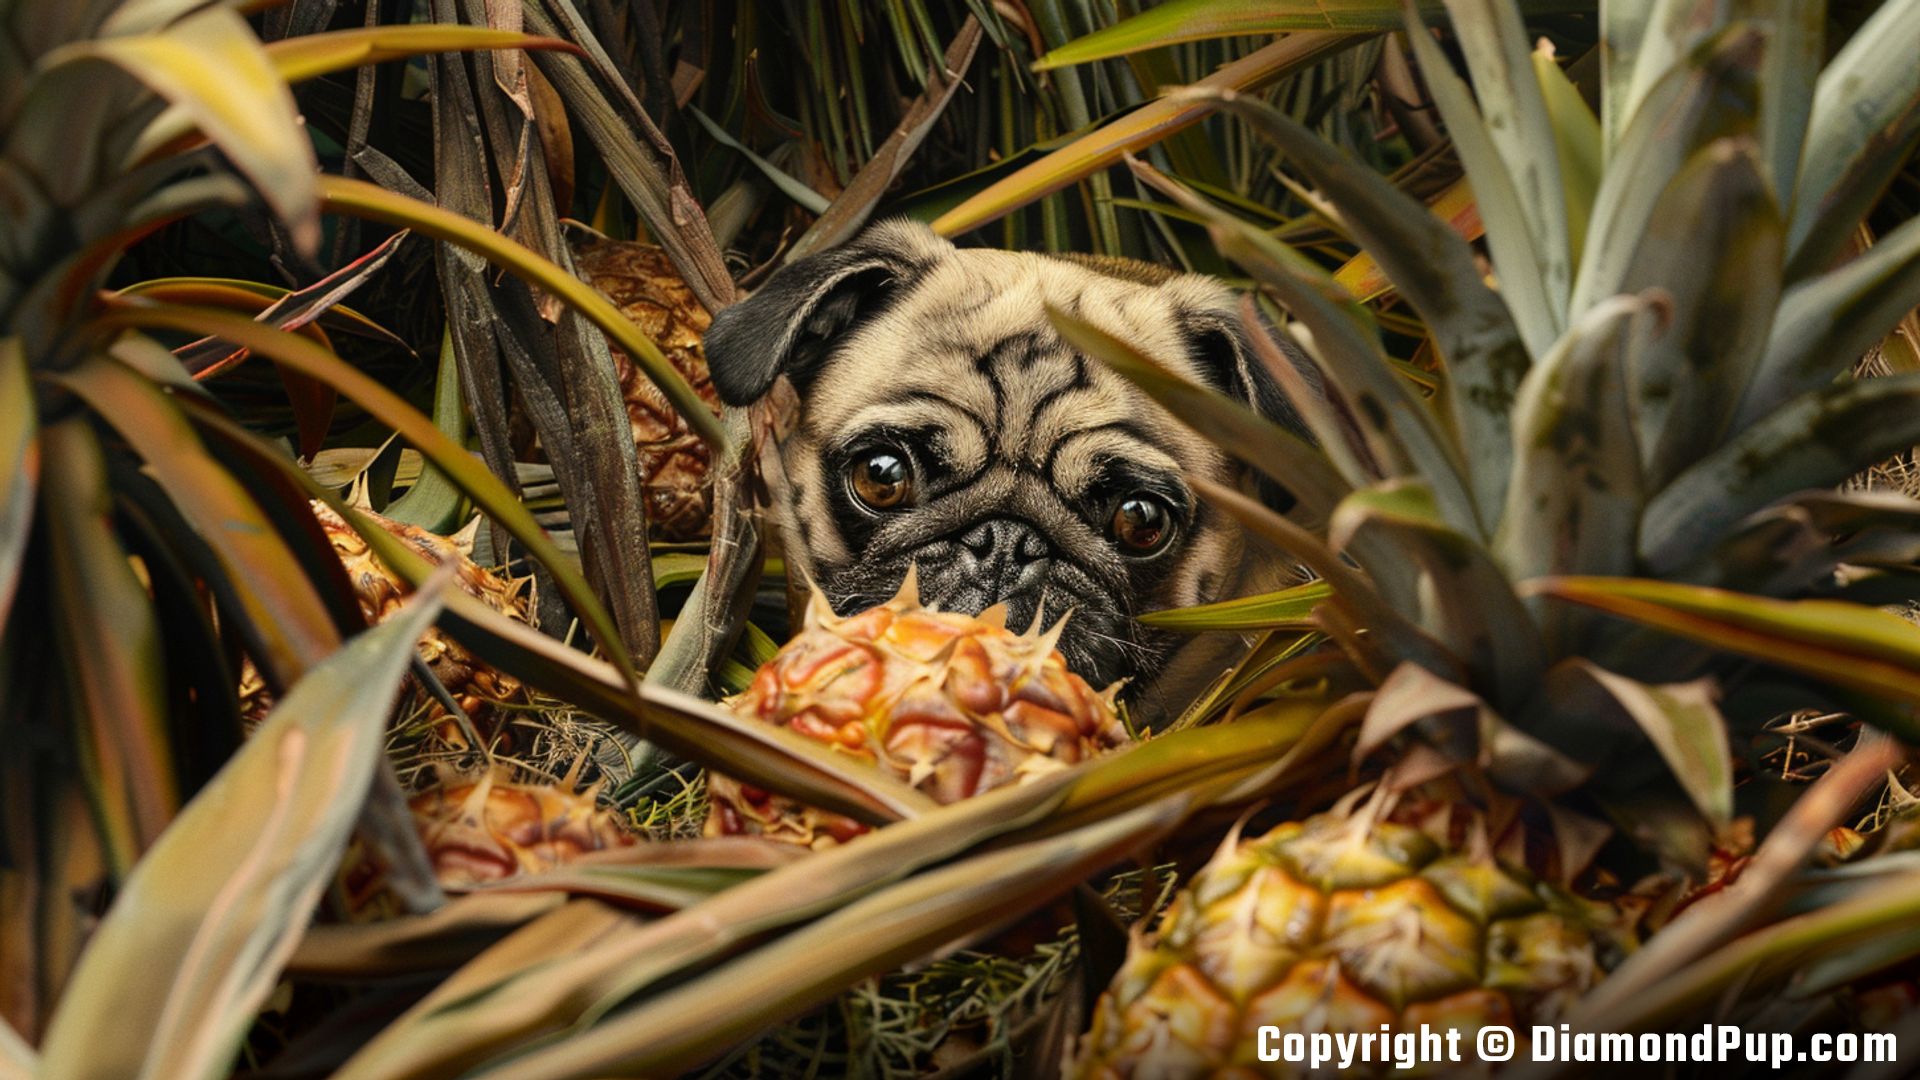 Image of a Playful Pug Snacking on Pineapple